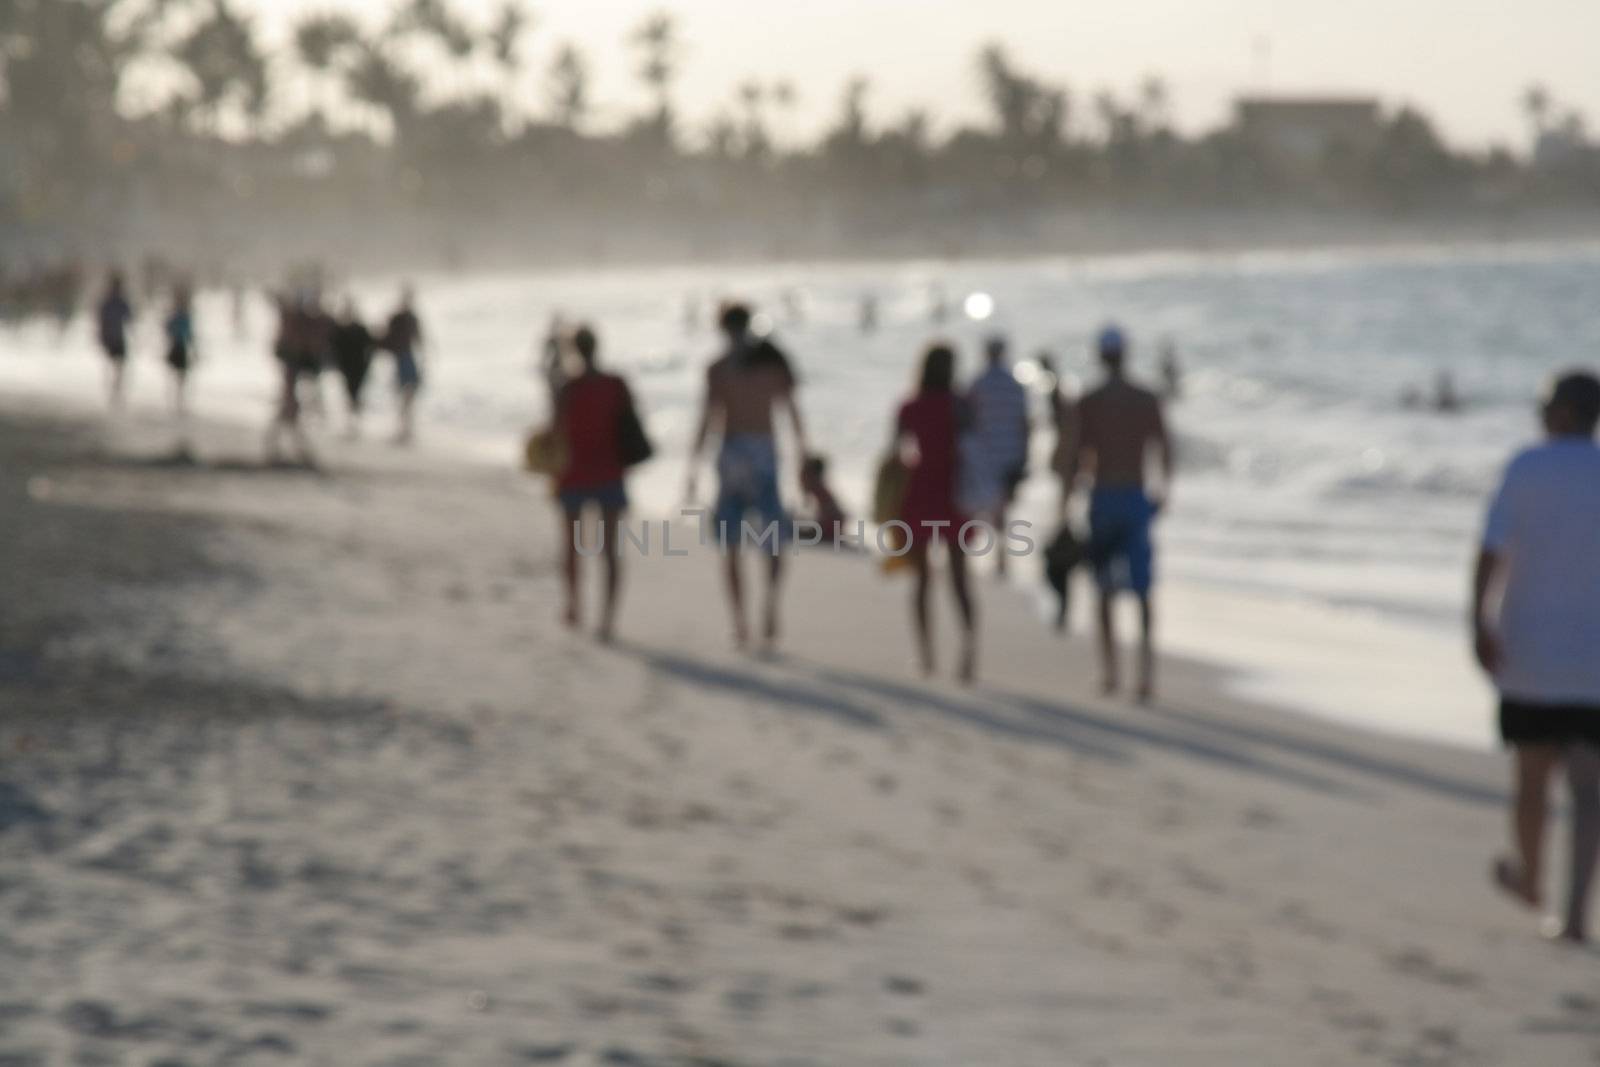 A blurred shot of a bunch of people walking on a tropical beach.